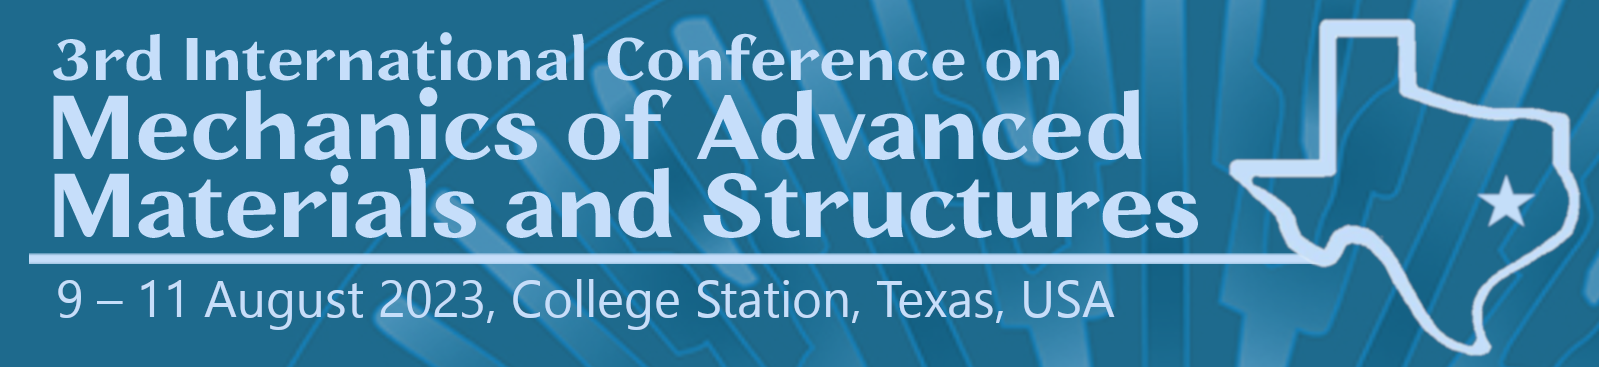 The 3rd International Conference on Mechanics of Advanced Materials and Structures, 9-11 August 2023, College Station, Texas, USA